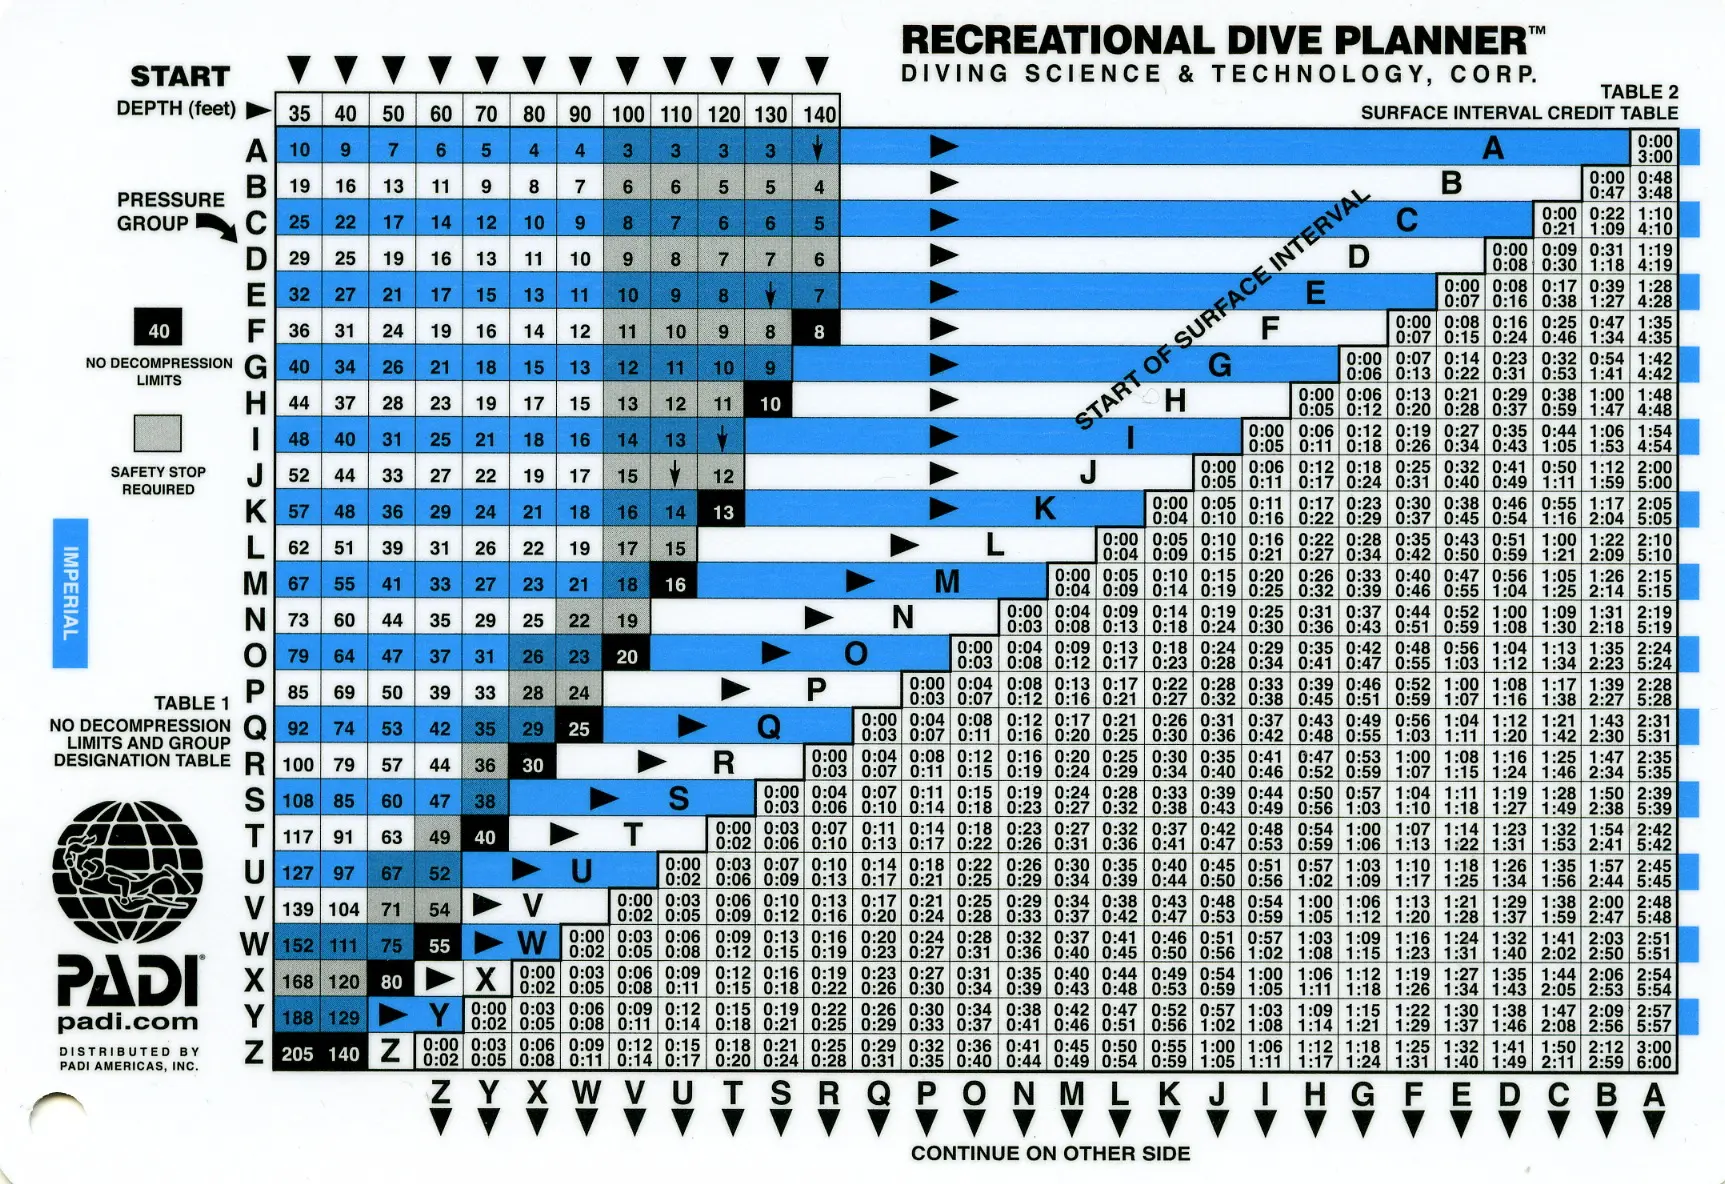 The Recreational Dive Planner